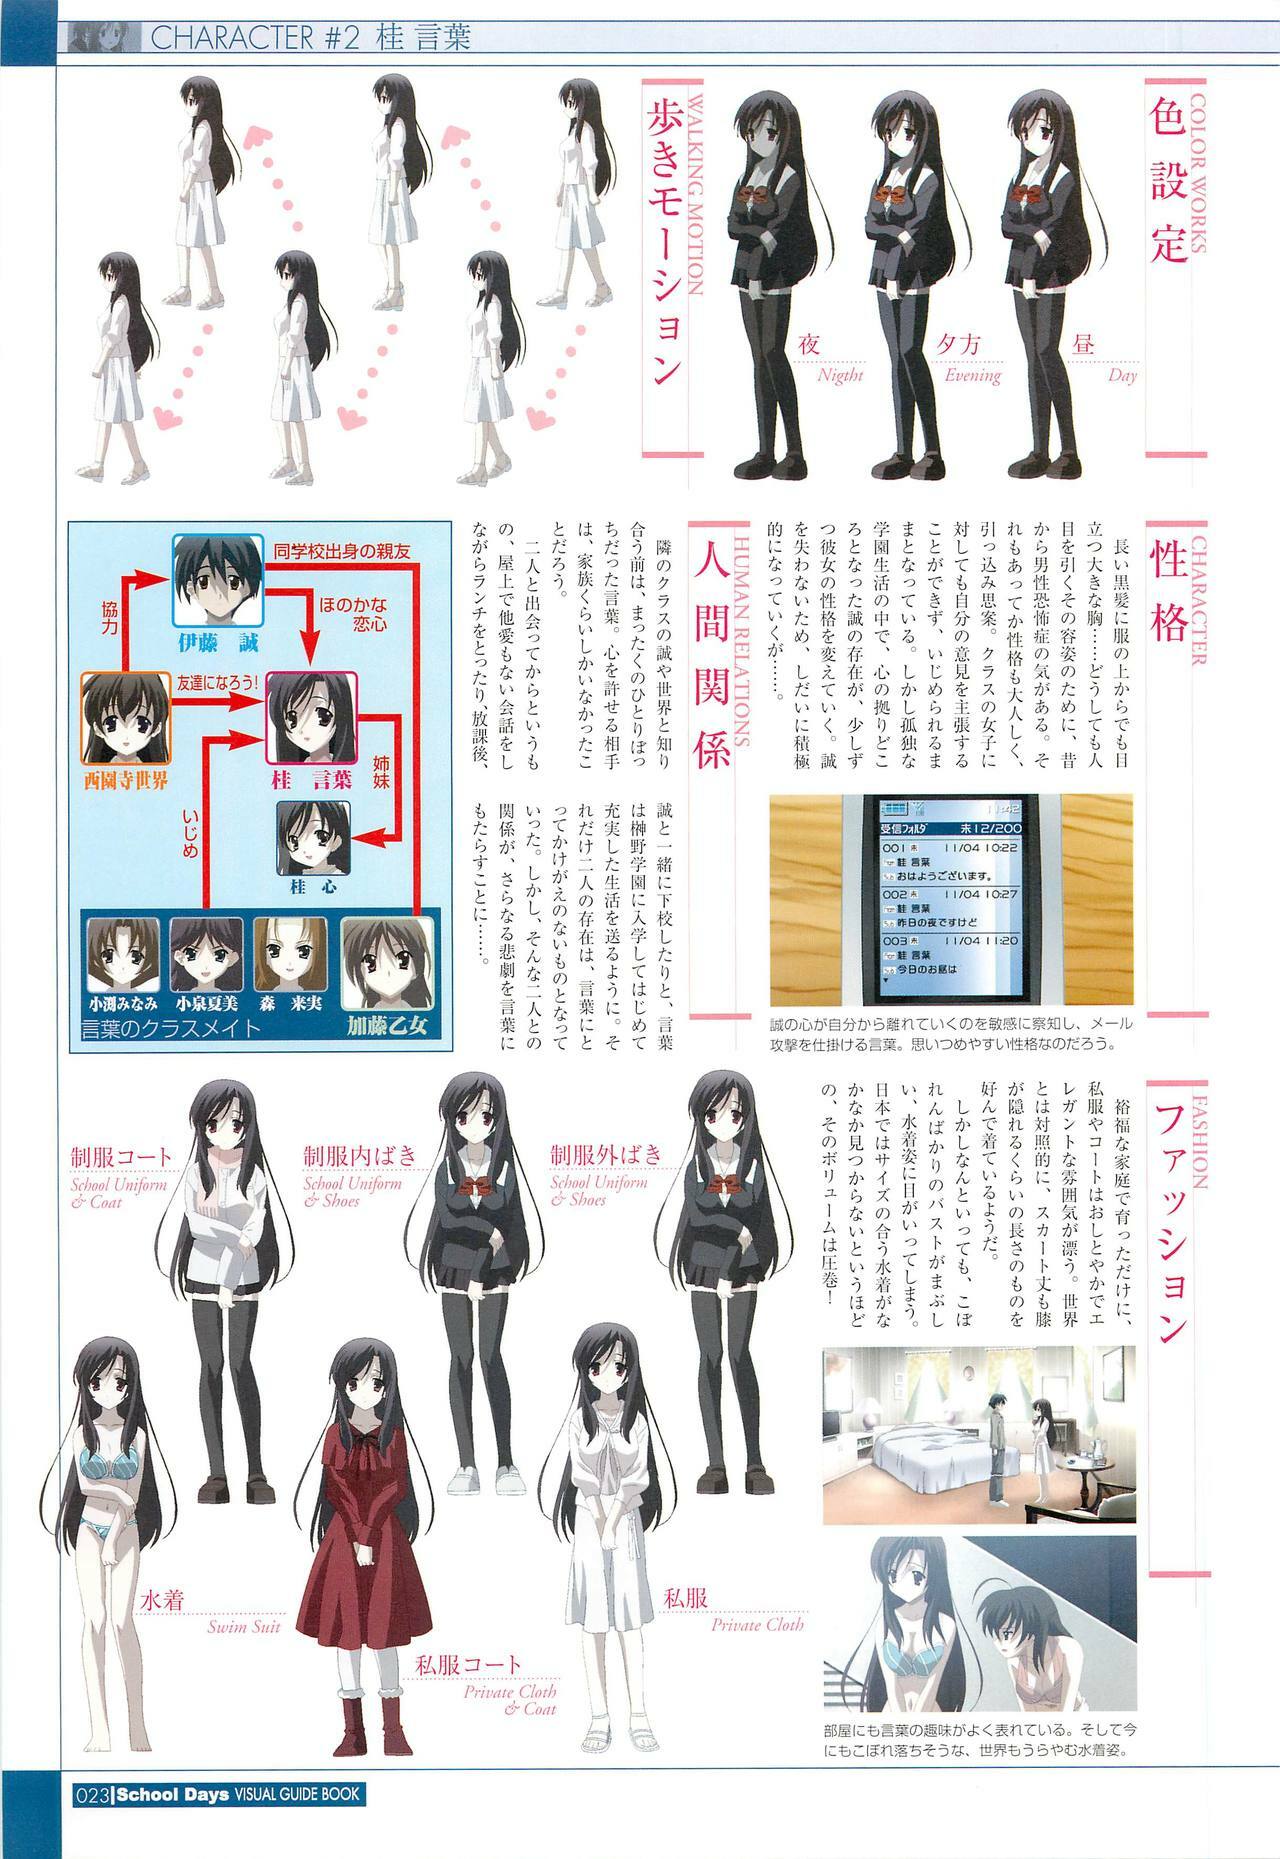 School Days Visual Guide Book page 25 full